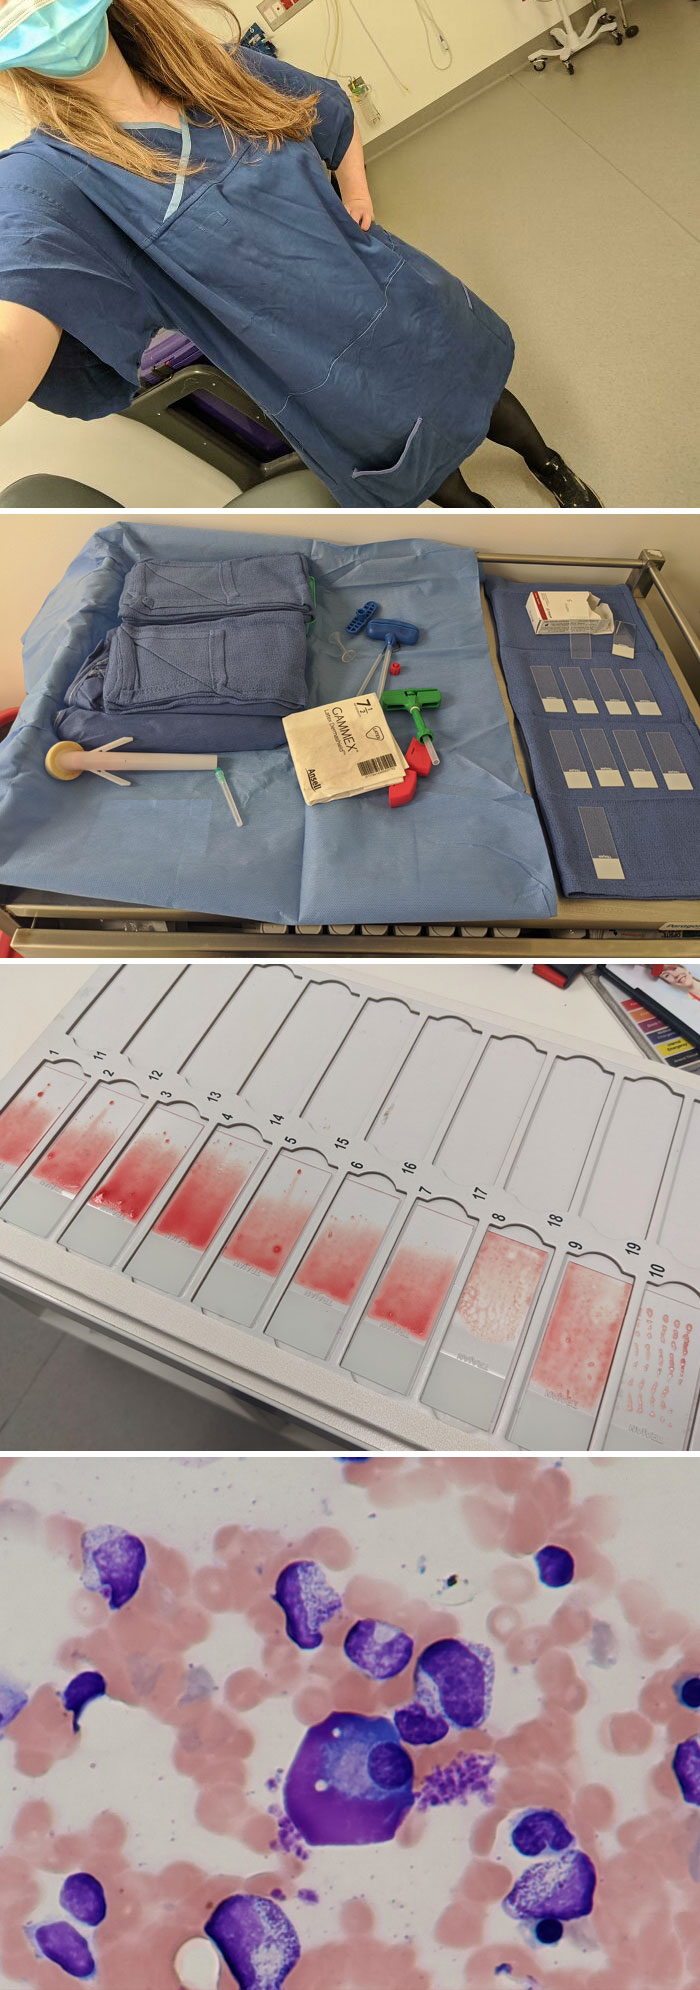 A Day In The Life Of A Hematology Registrar. And How To Do A Bone Marrow Biopsy